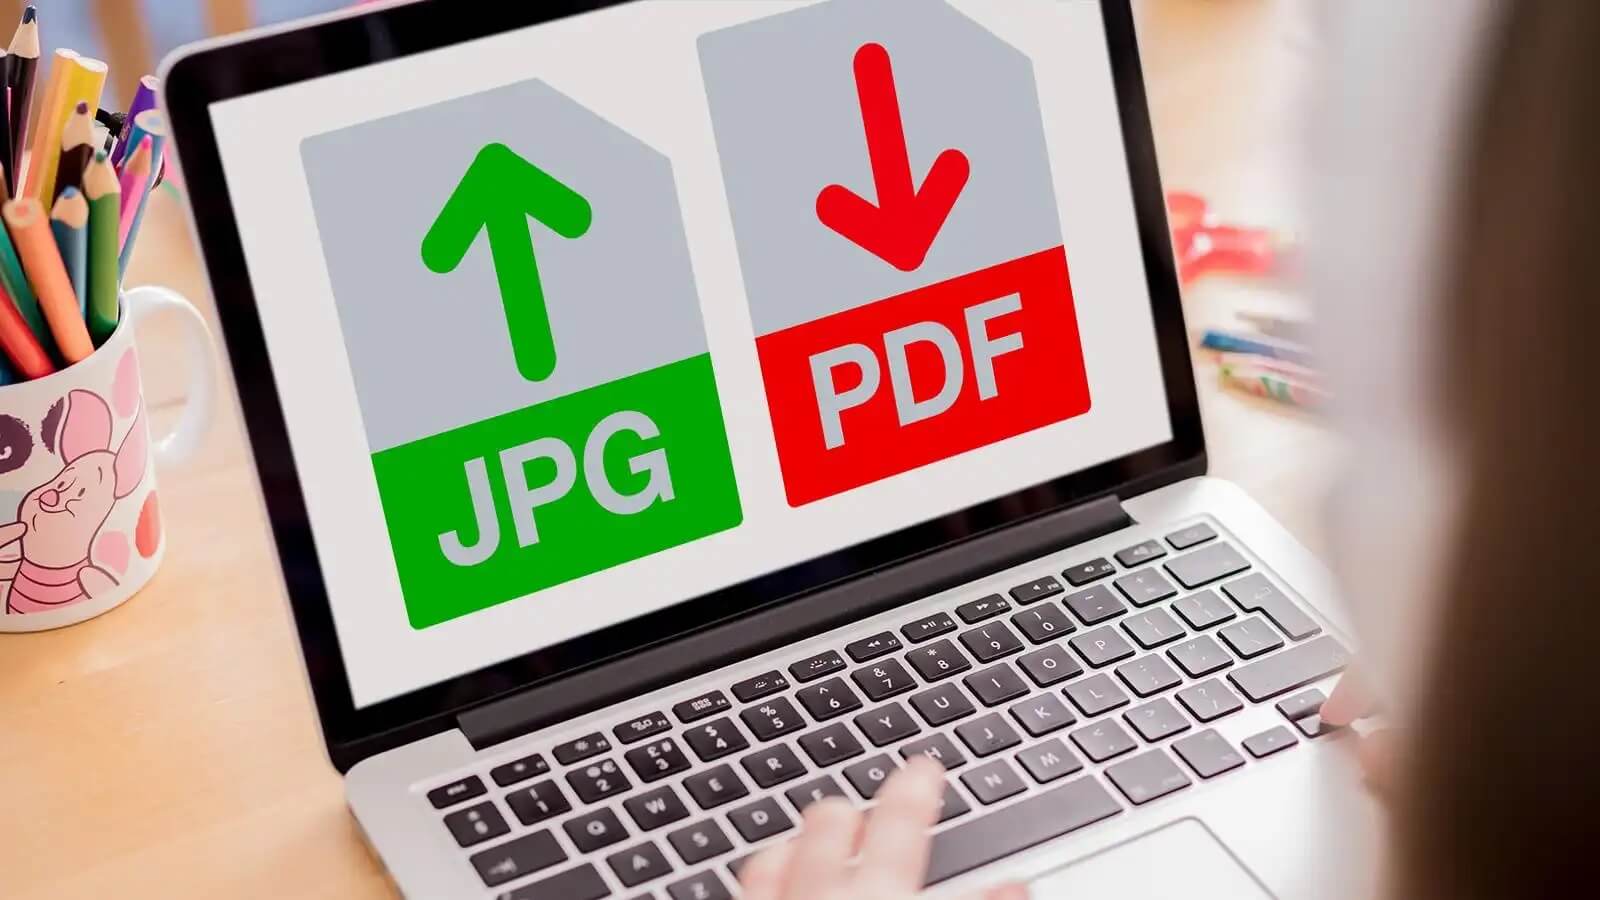 How To Convert JPG To PDF - Tested Tools So Far In 2022